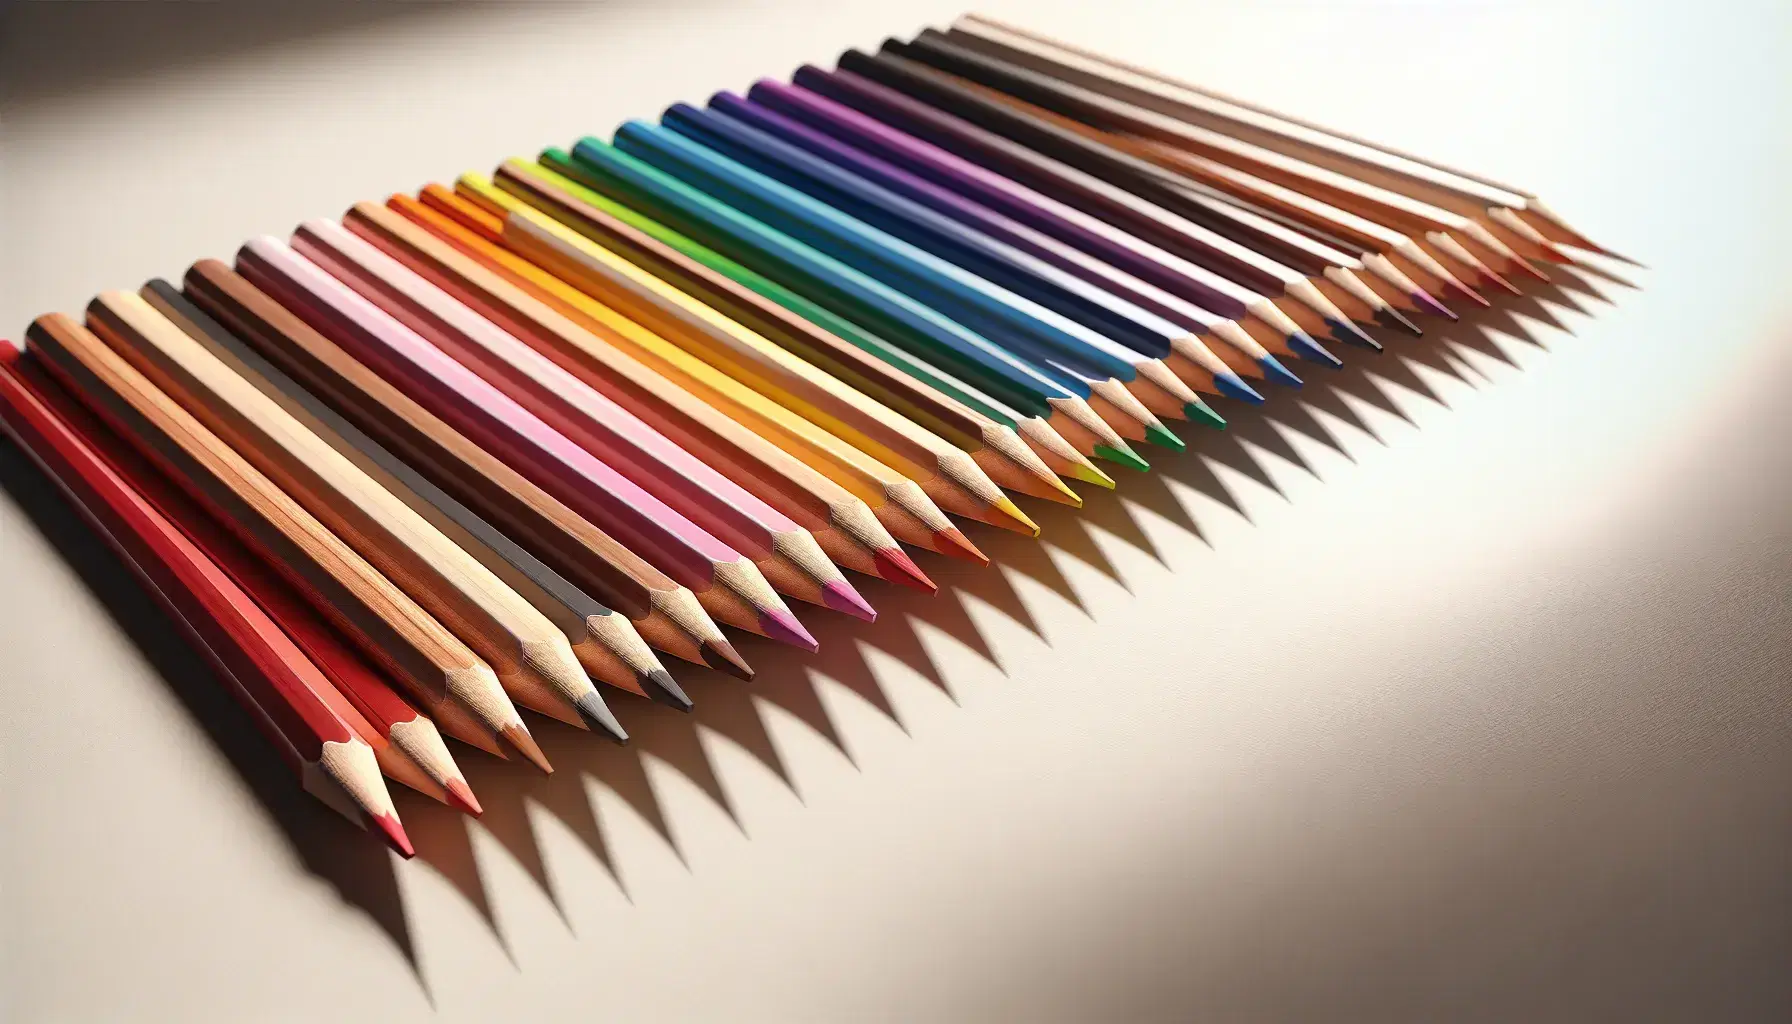 Colored pencils in rainbow order with tips pointing right on a white background, showcasing a spectrum from red to violet with unused pink erasers.